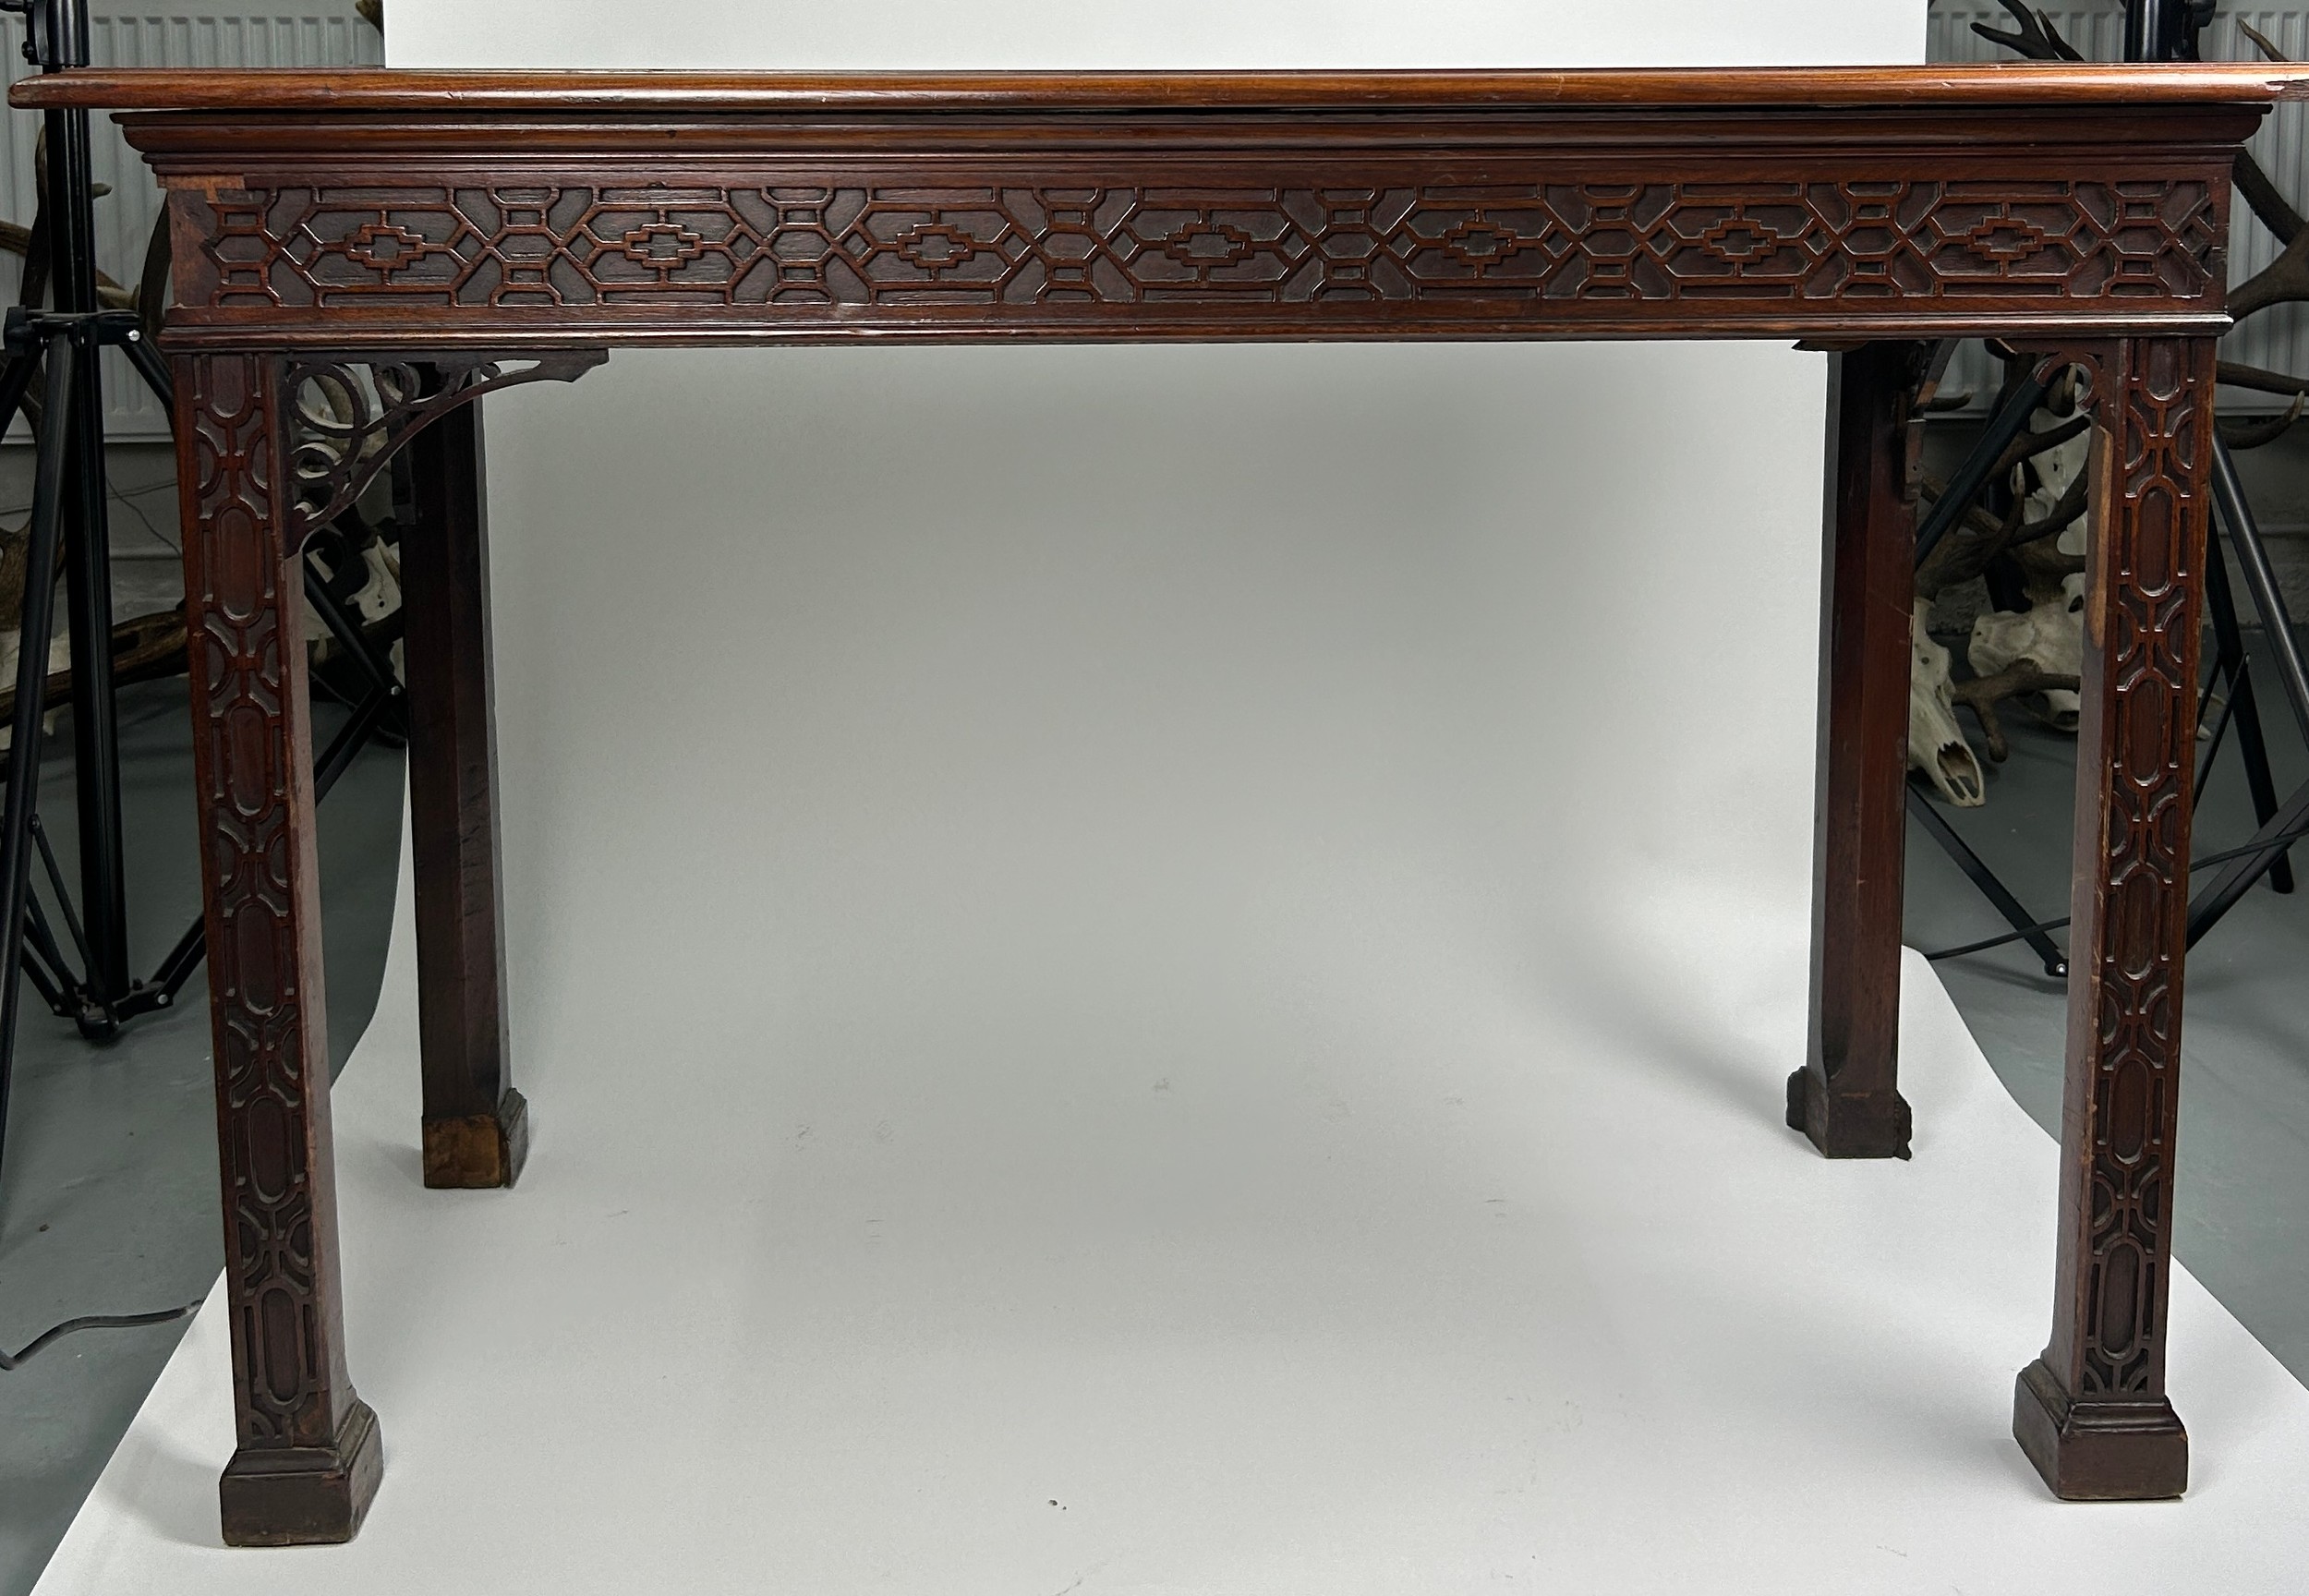 A GEORGE III SERVING TABLE CIRCA 1780 IN MANNER OF THOMAS CHIPPENDALE, Chinese gothic design with